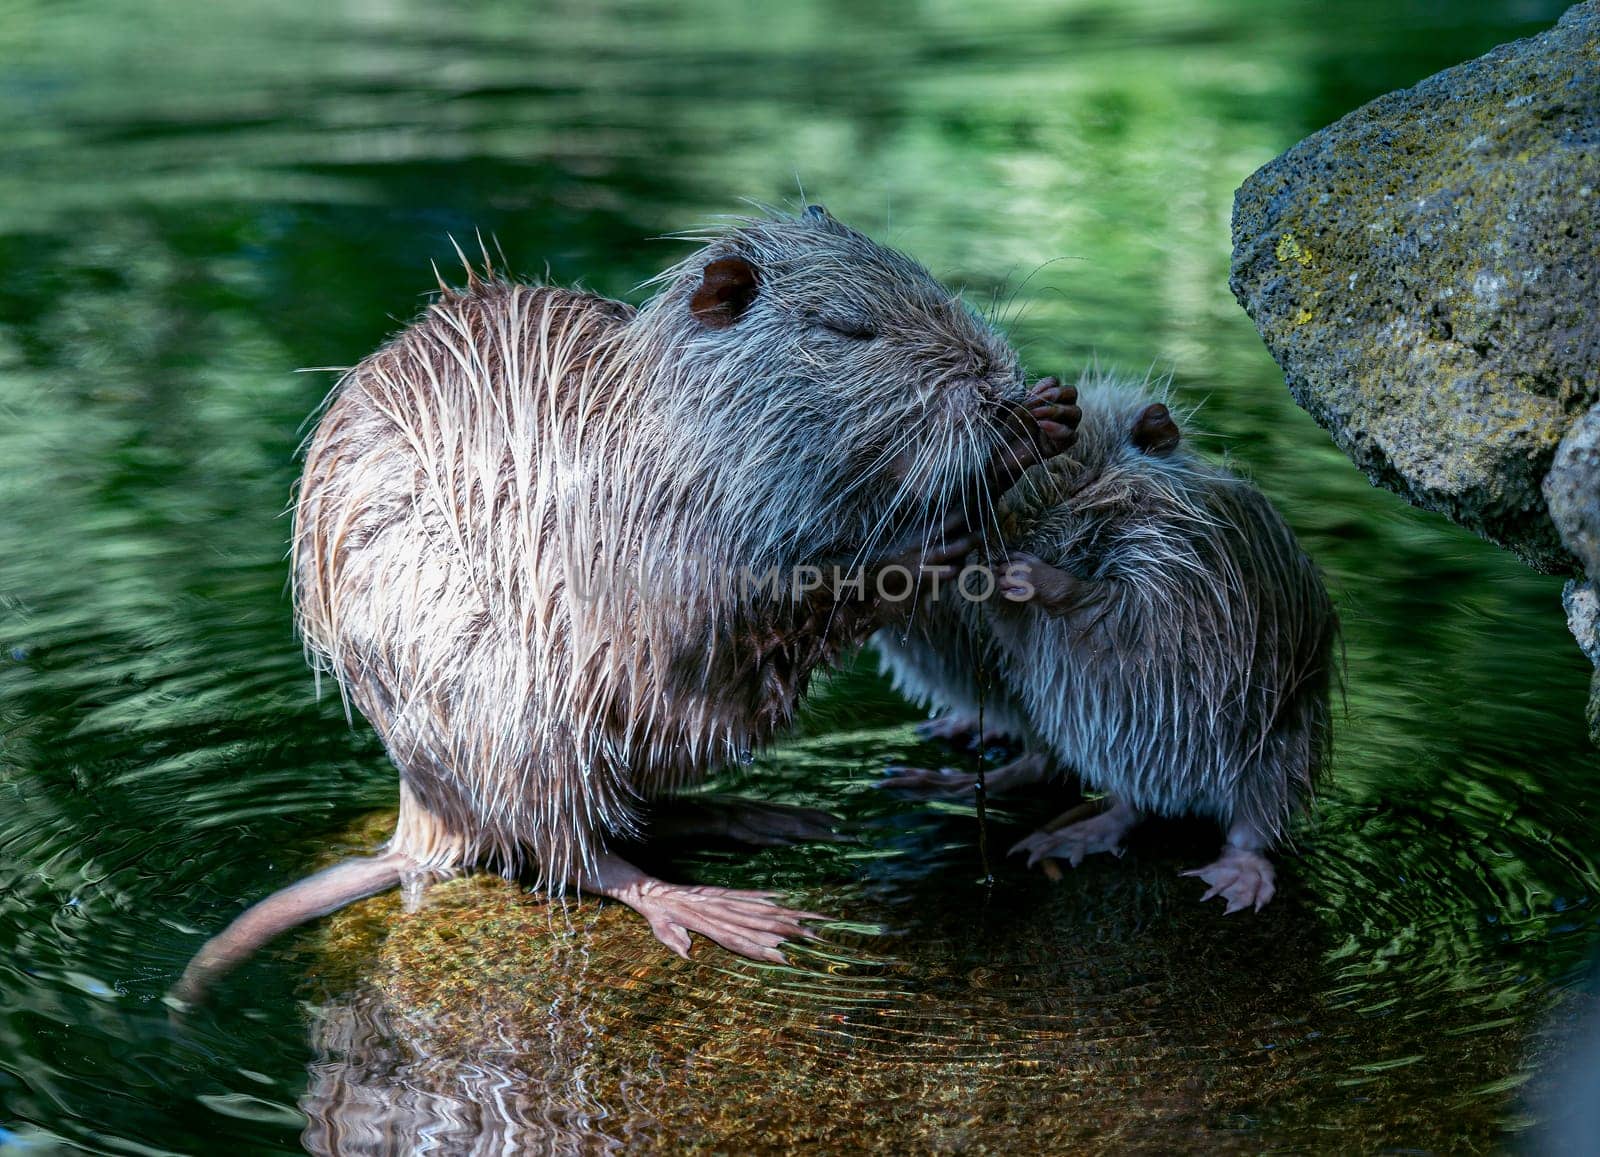 a female coypu or myocaster coypus taking care of her young baby sitting on a rock in the water the entenweiher in germany in the nature reserve rausherpark.